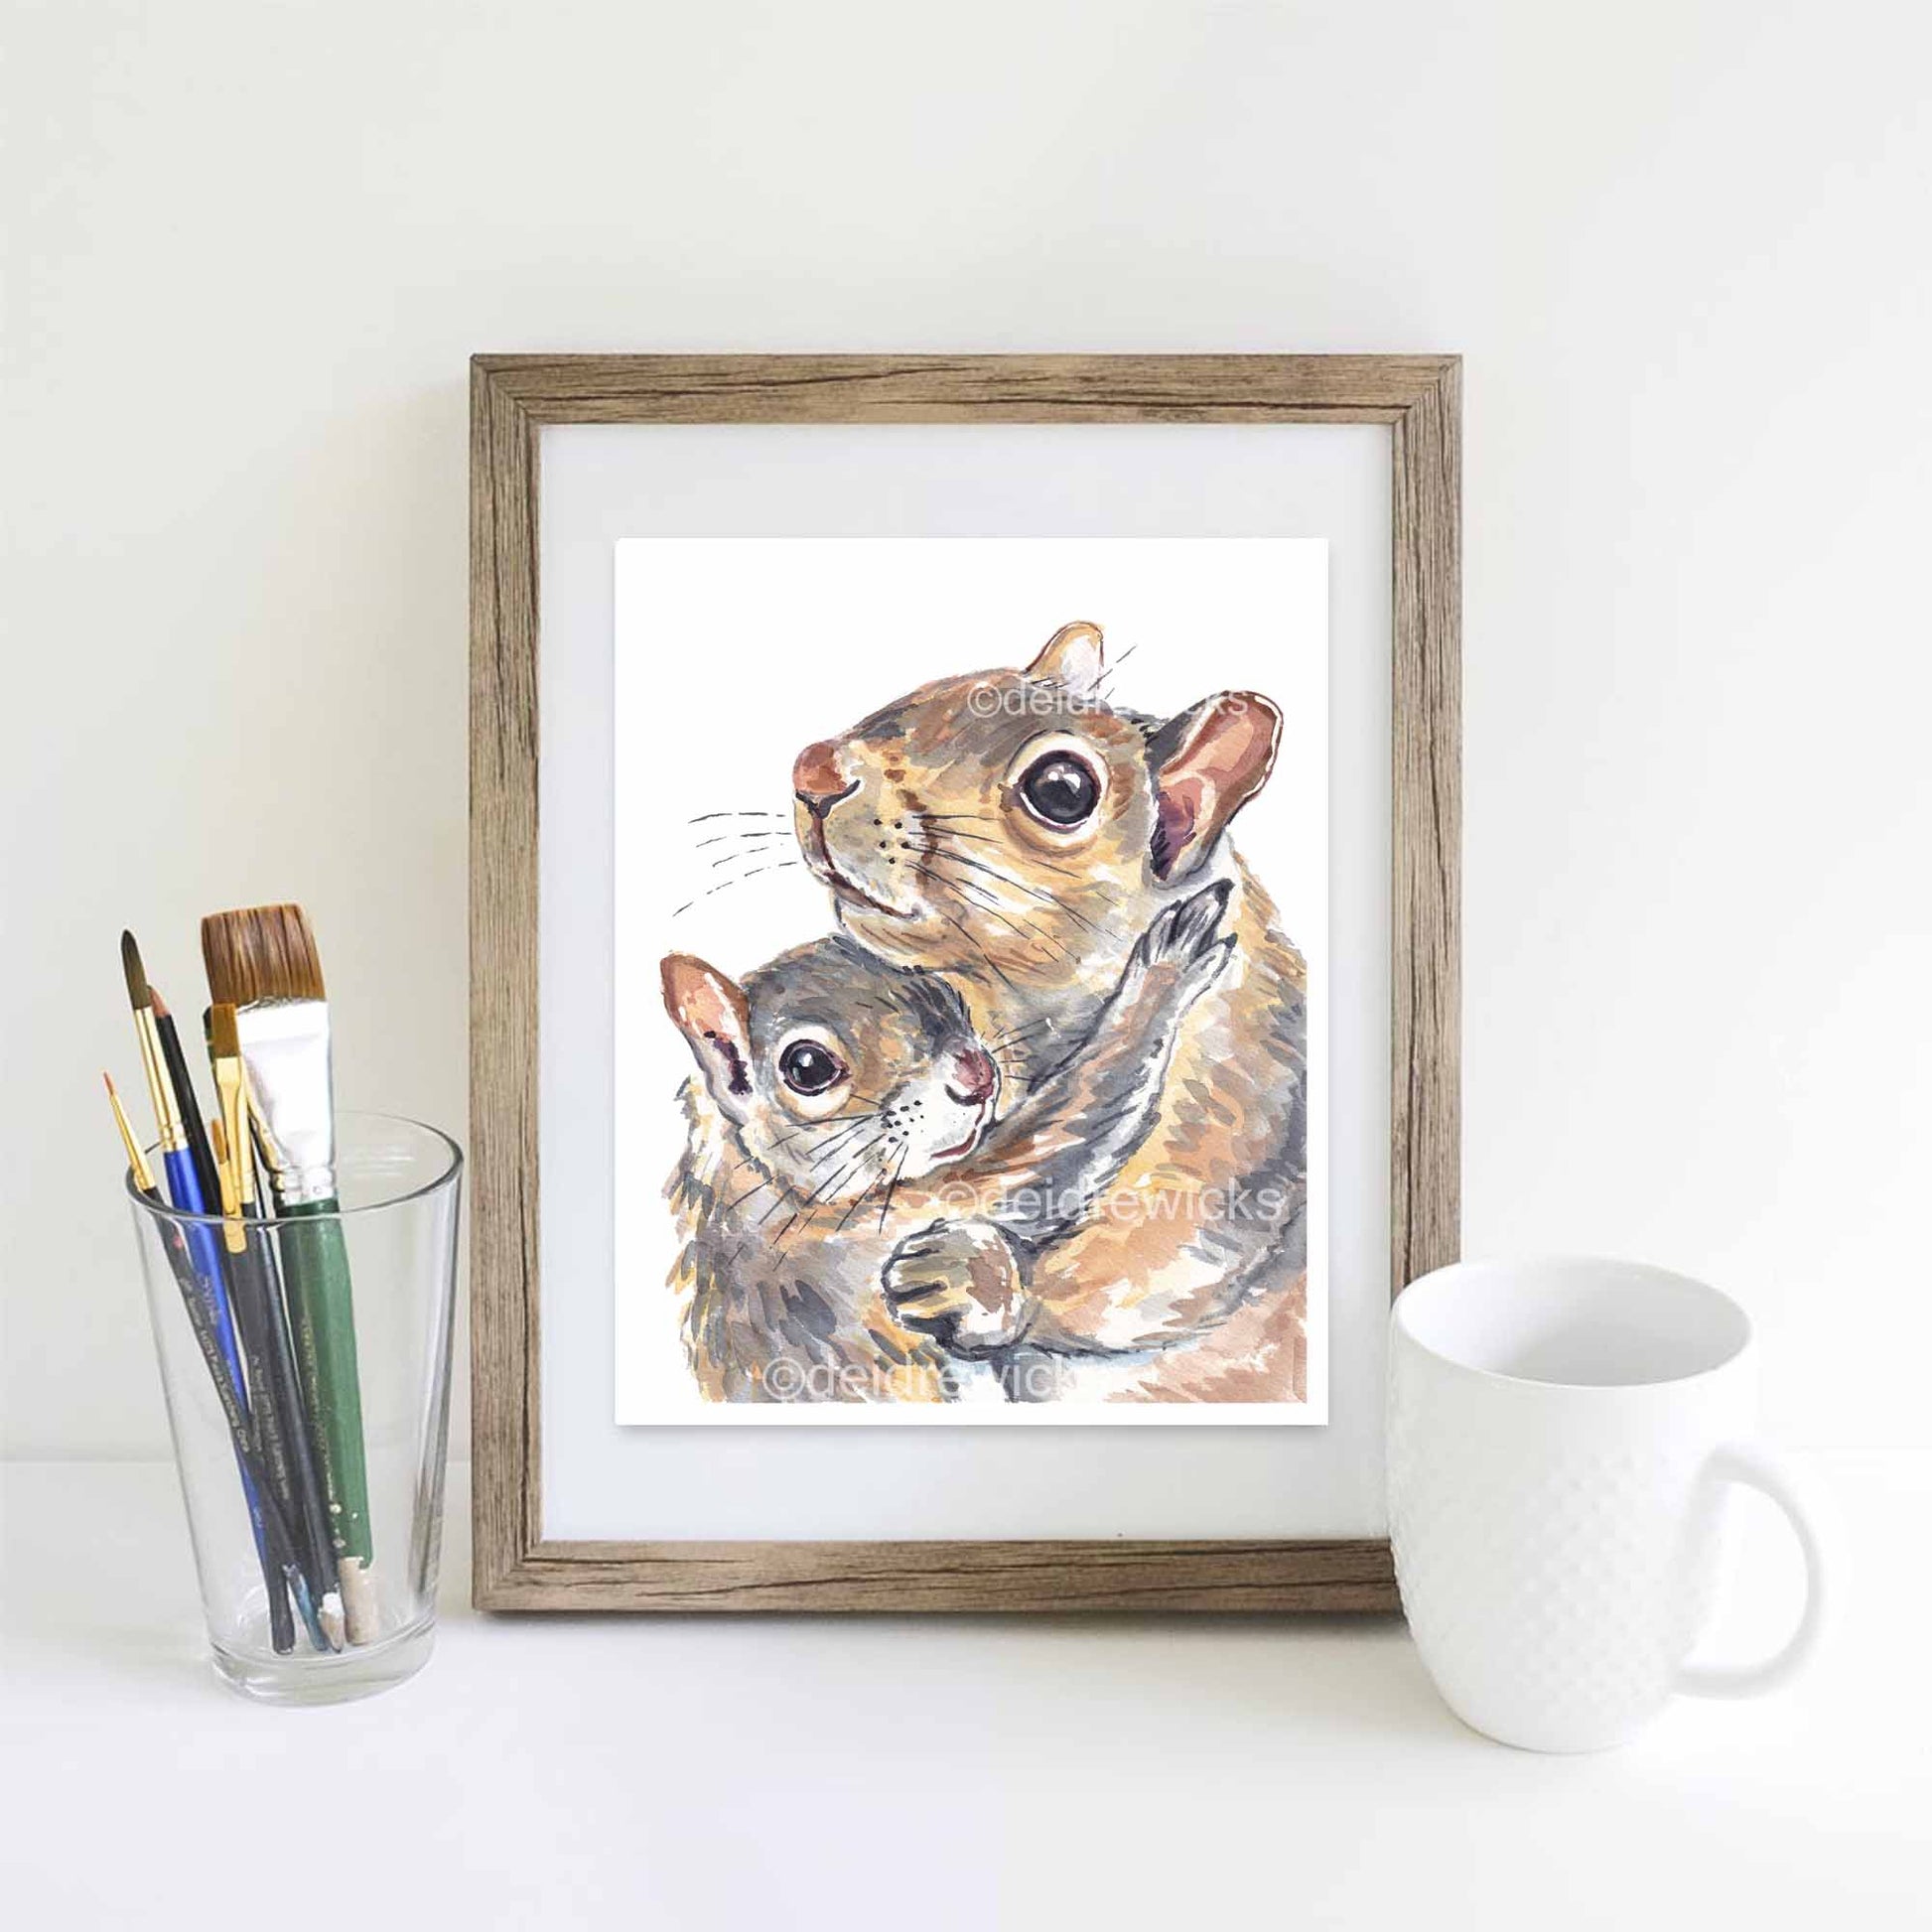 Framed example of a mother and child squirrel watercolour painting by Deidre Wicks